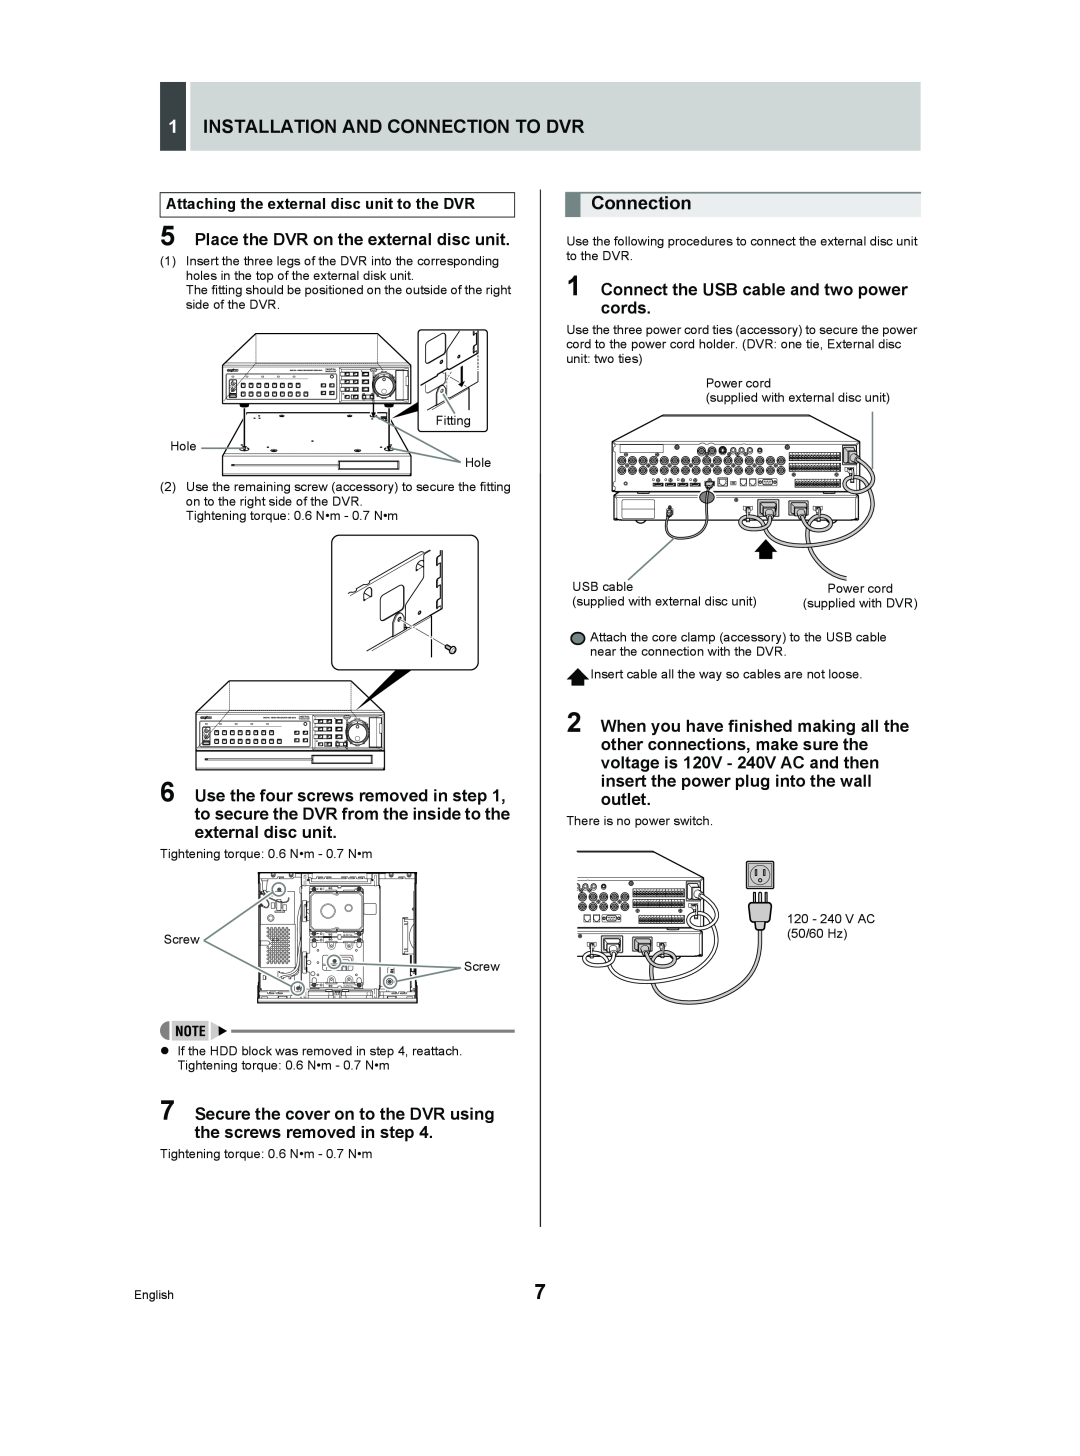 Sanyo VA-EXD1W instruction manual 1INSTALLATION AND CONNECTION TO DVR, Connection 